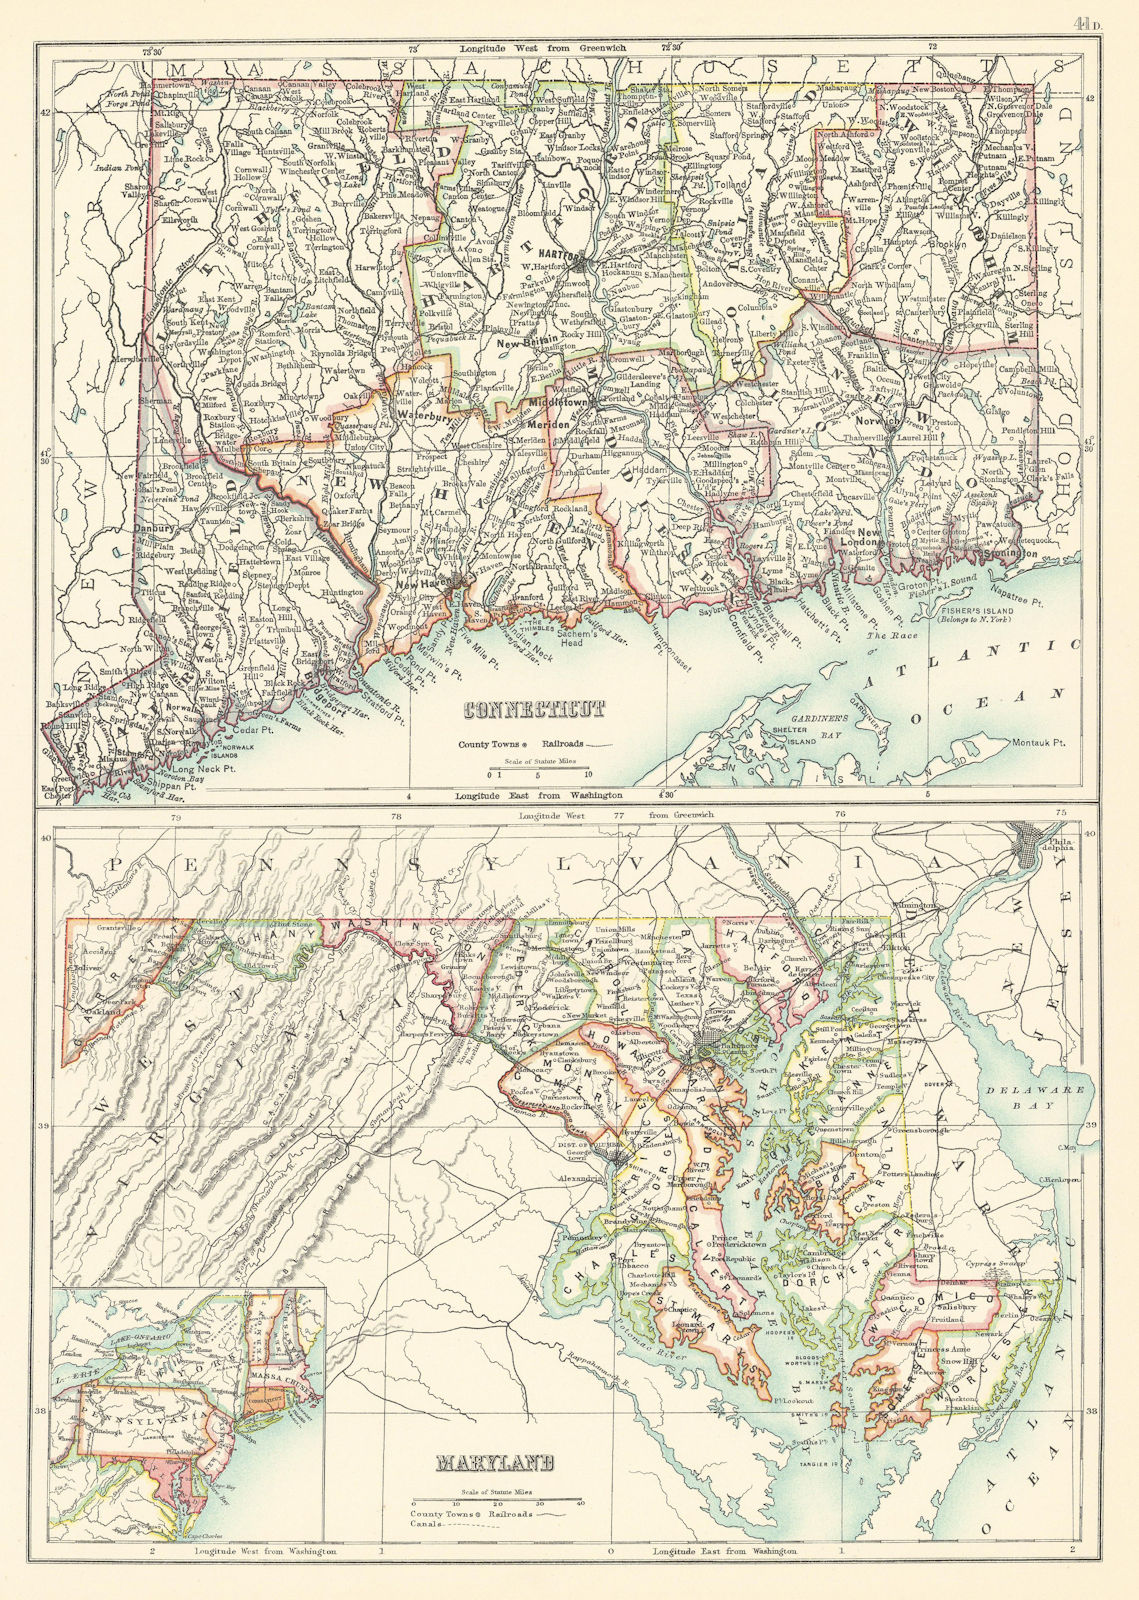 Associate Product Connecticut and Maryland state maps showing counties. BARTHOLOMEW 1898 old